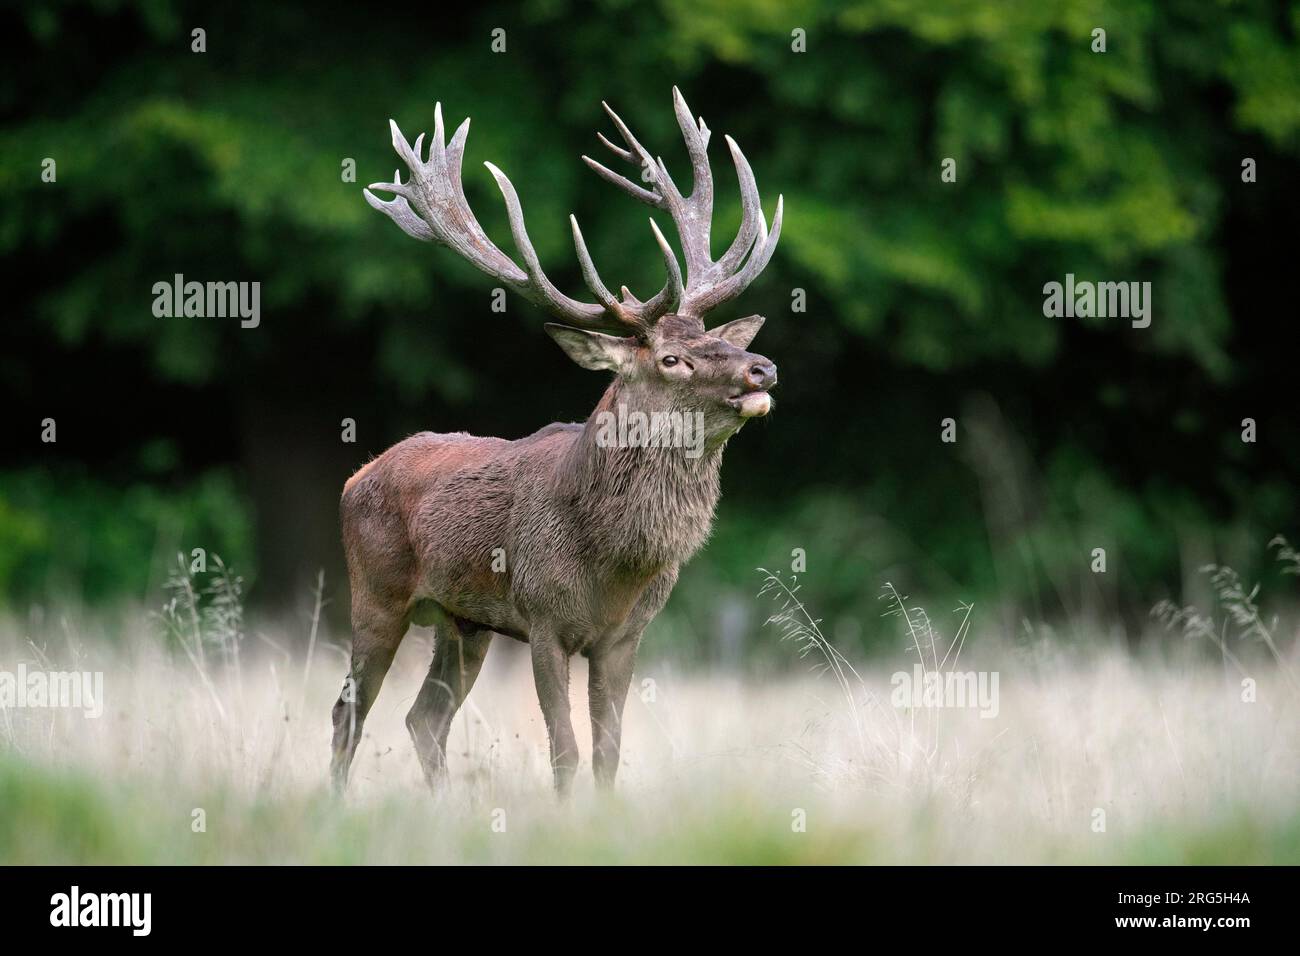 Red deer (Cervus elaphus) stag with big antlers in grassland at forest's edge during the rut in autumn / fall Stock Photo